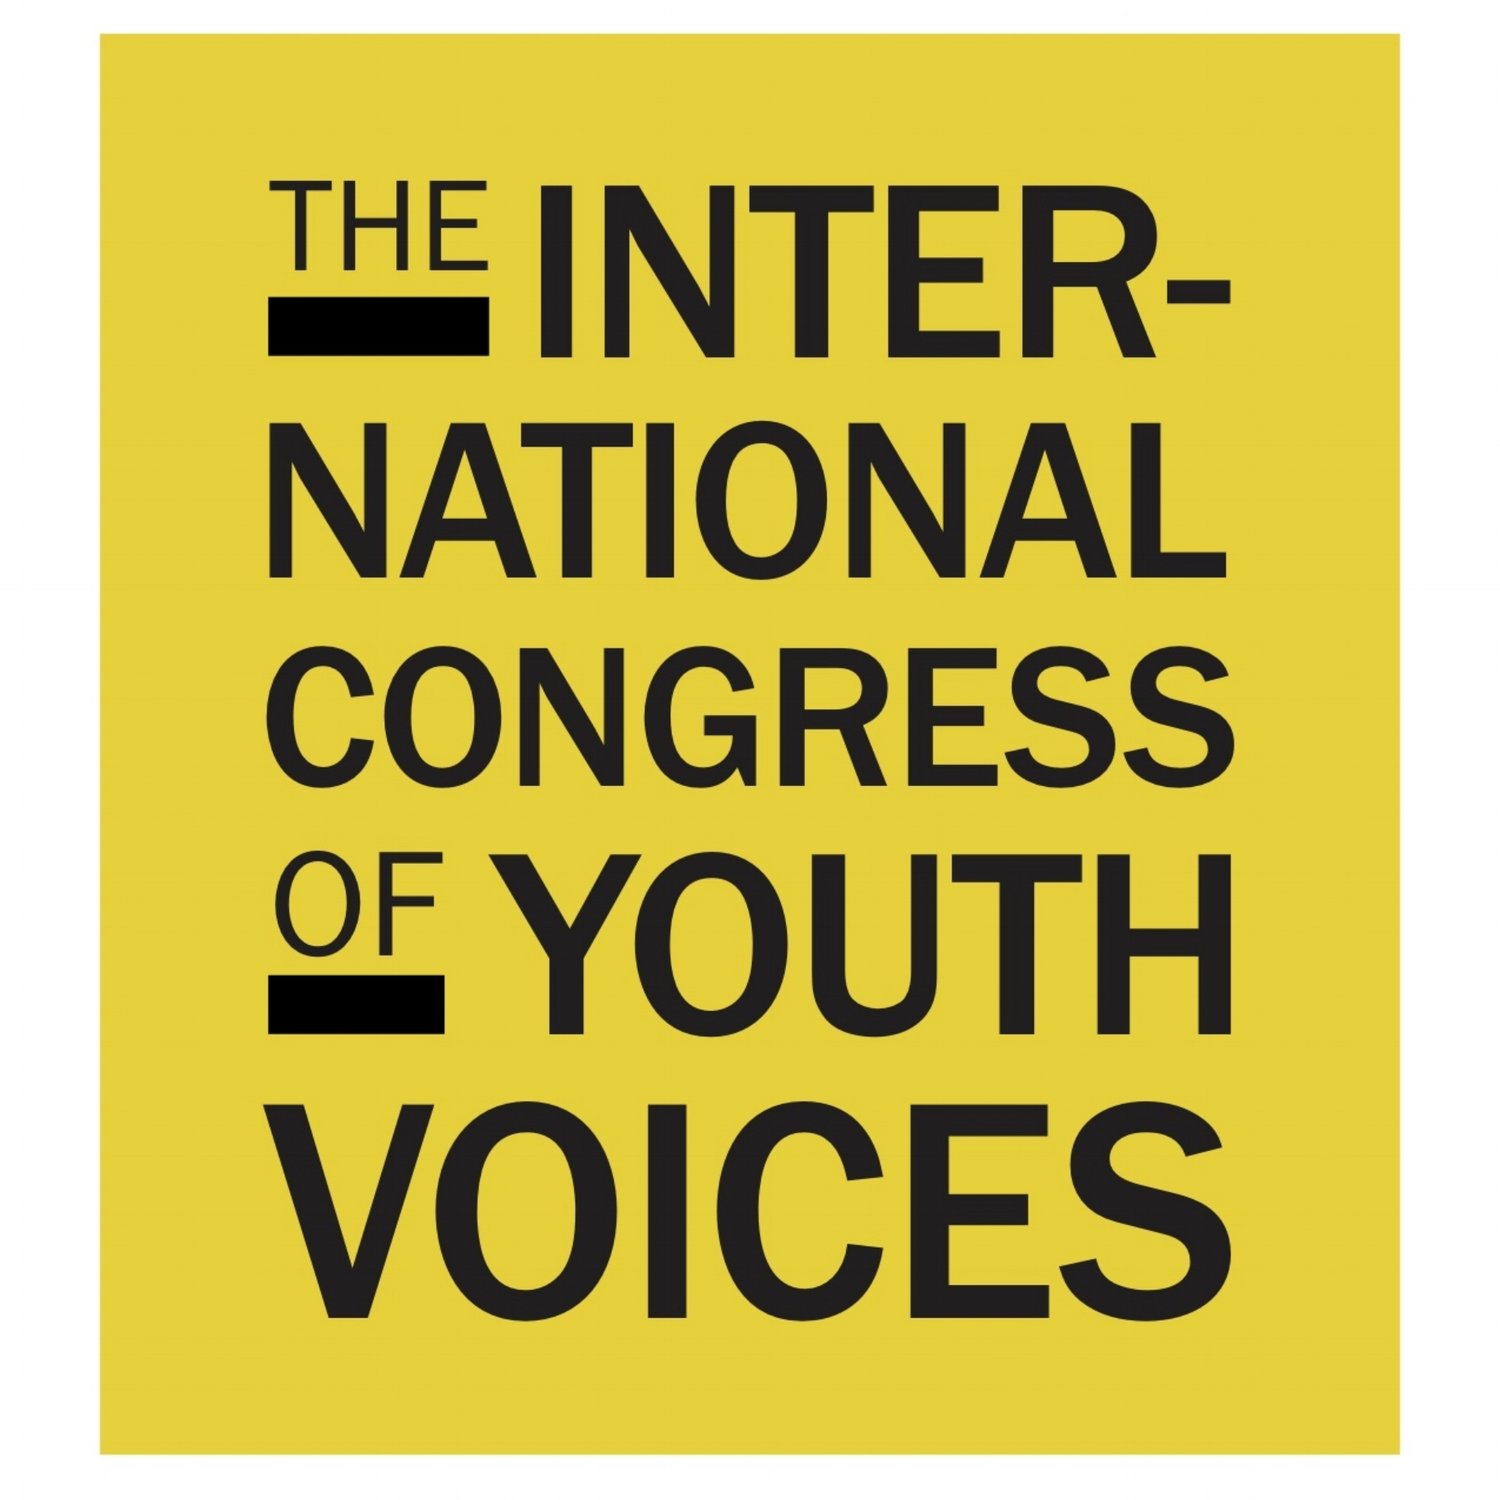 THE INTERNATIONAL CONGRESS OF YOUTH VOICES